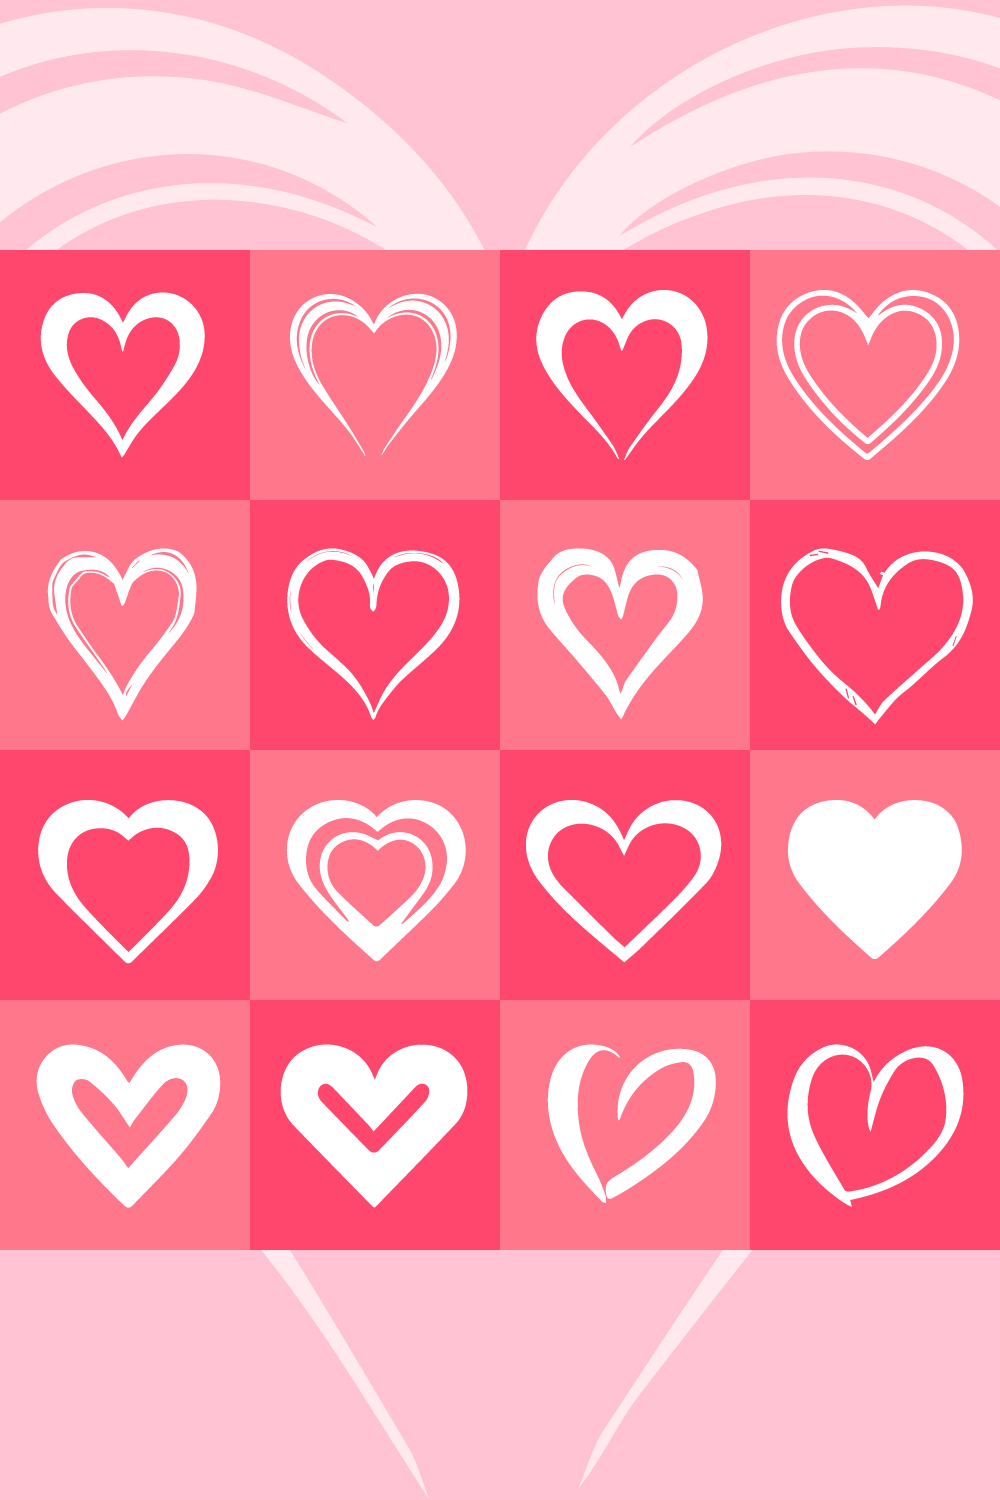 16 Heart shapes pinterest preview image.